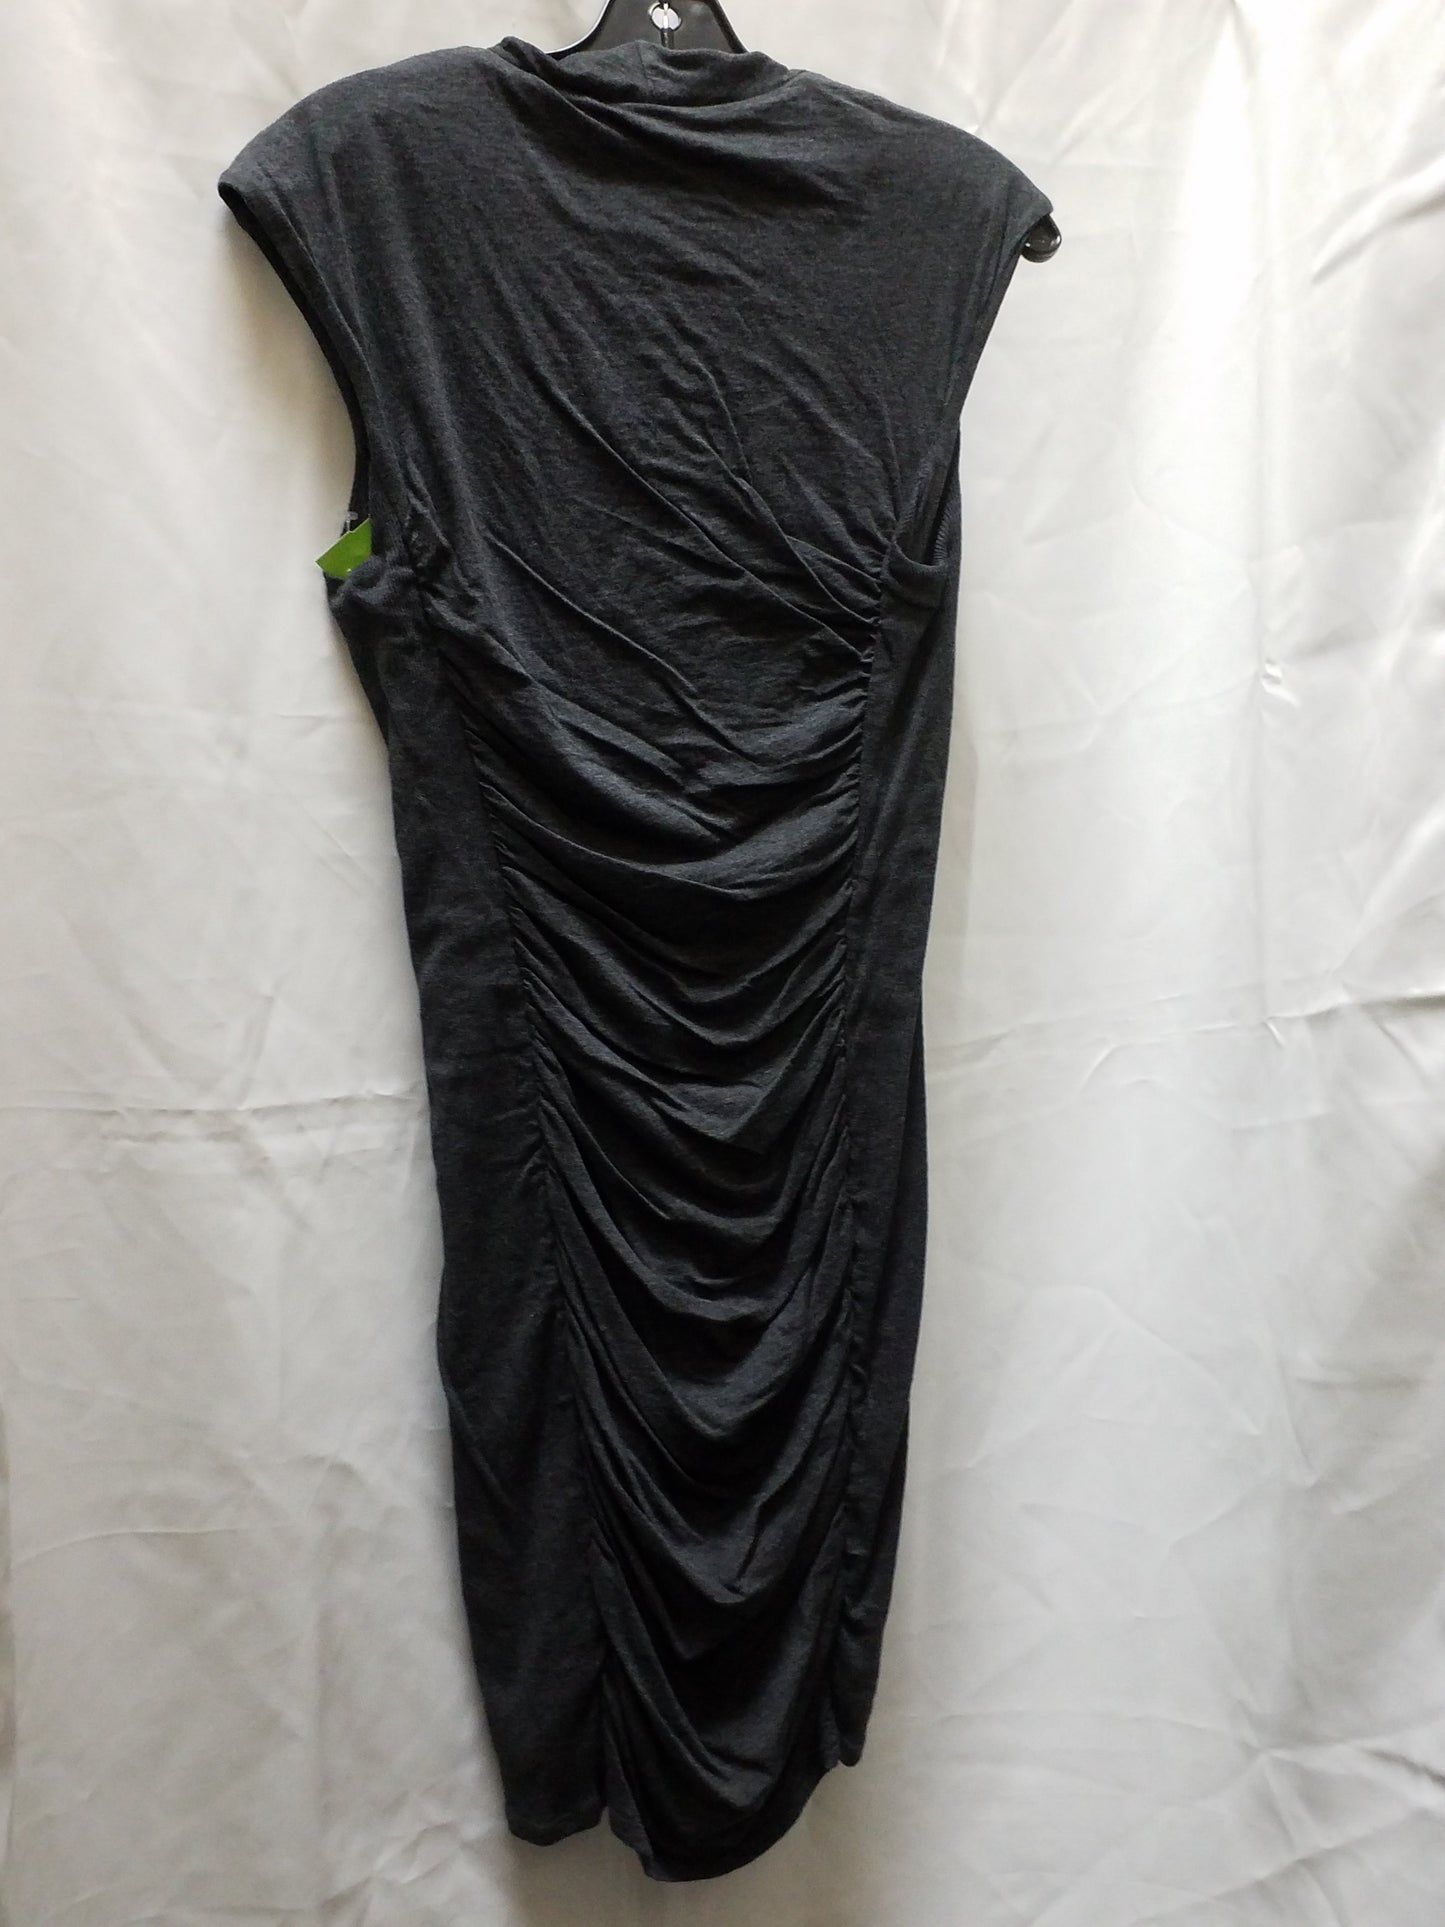 Dress Casual Midi By Kenneth Cole  Size: L